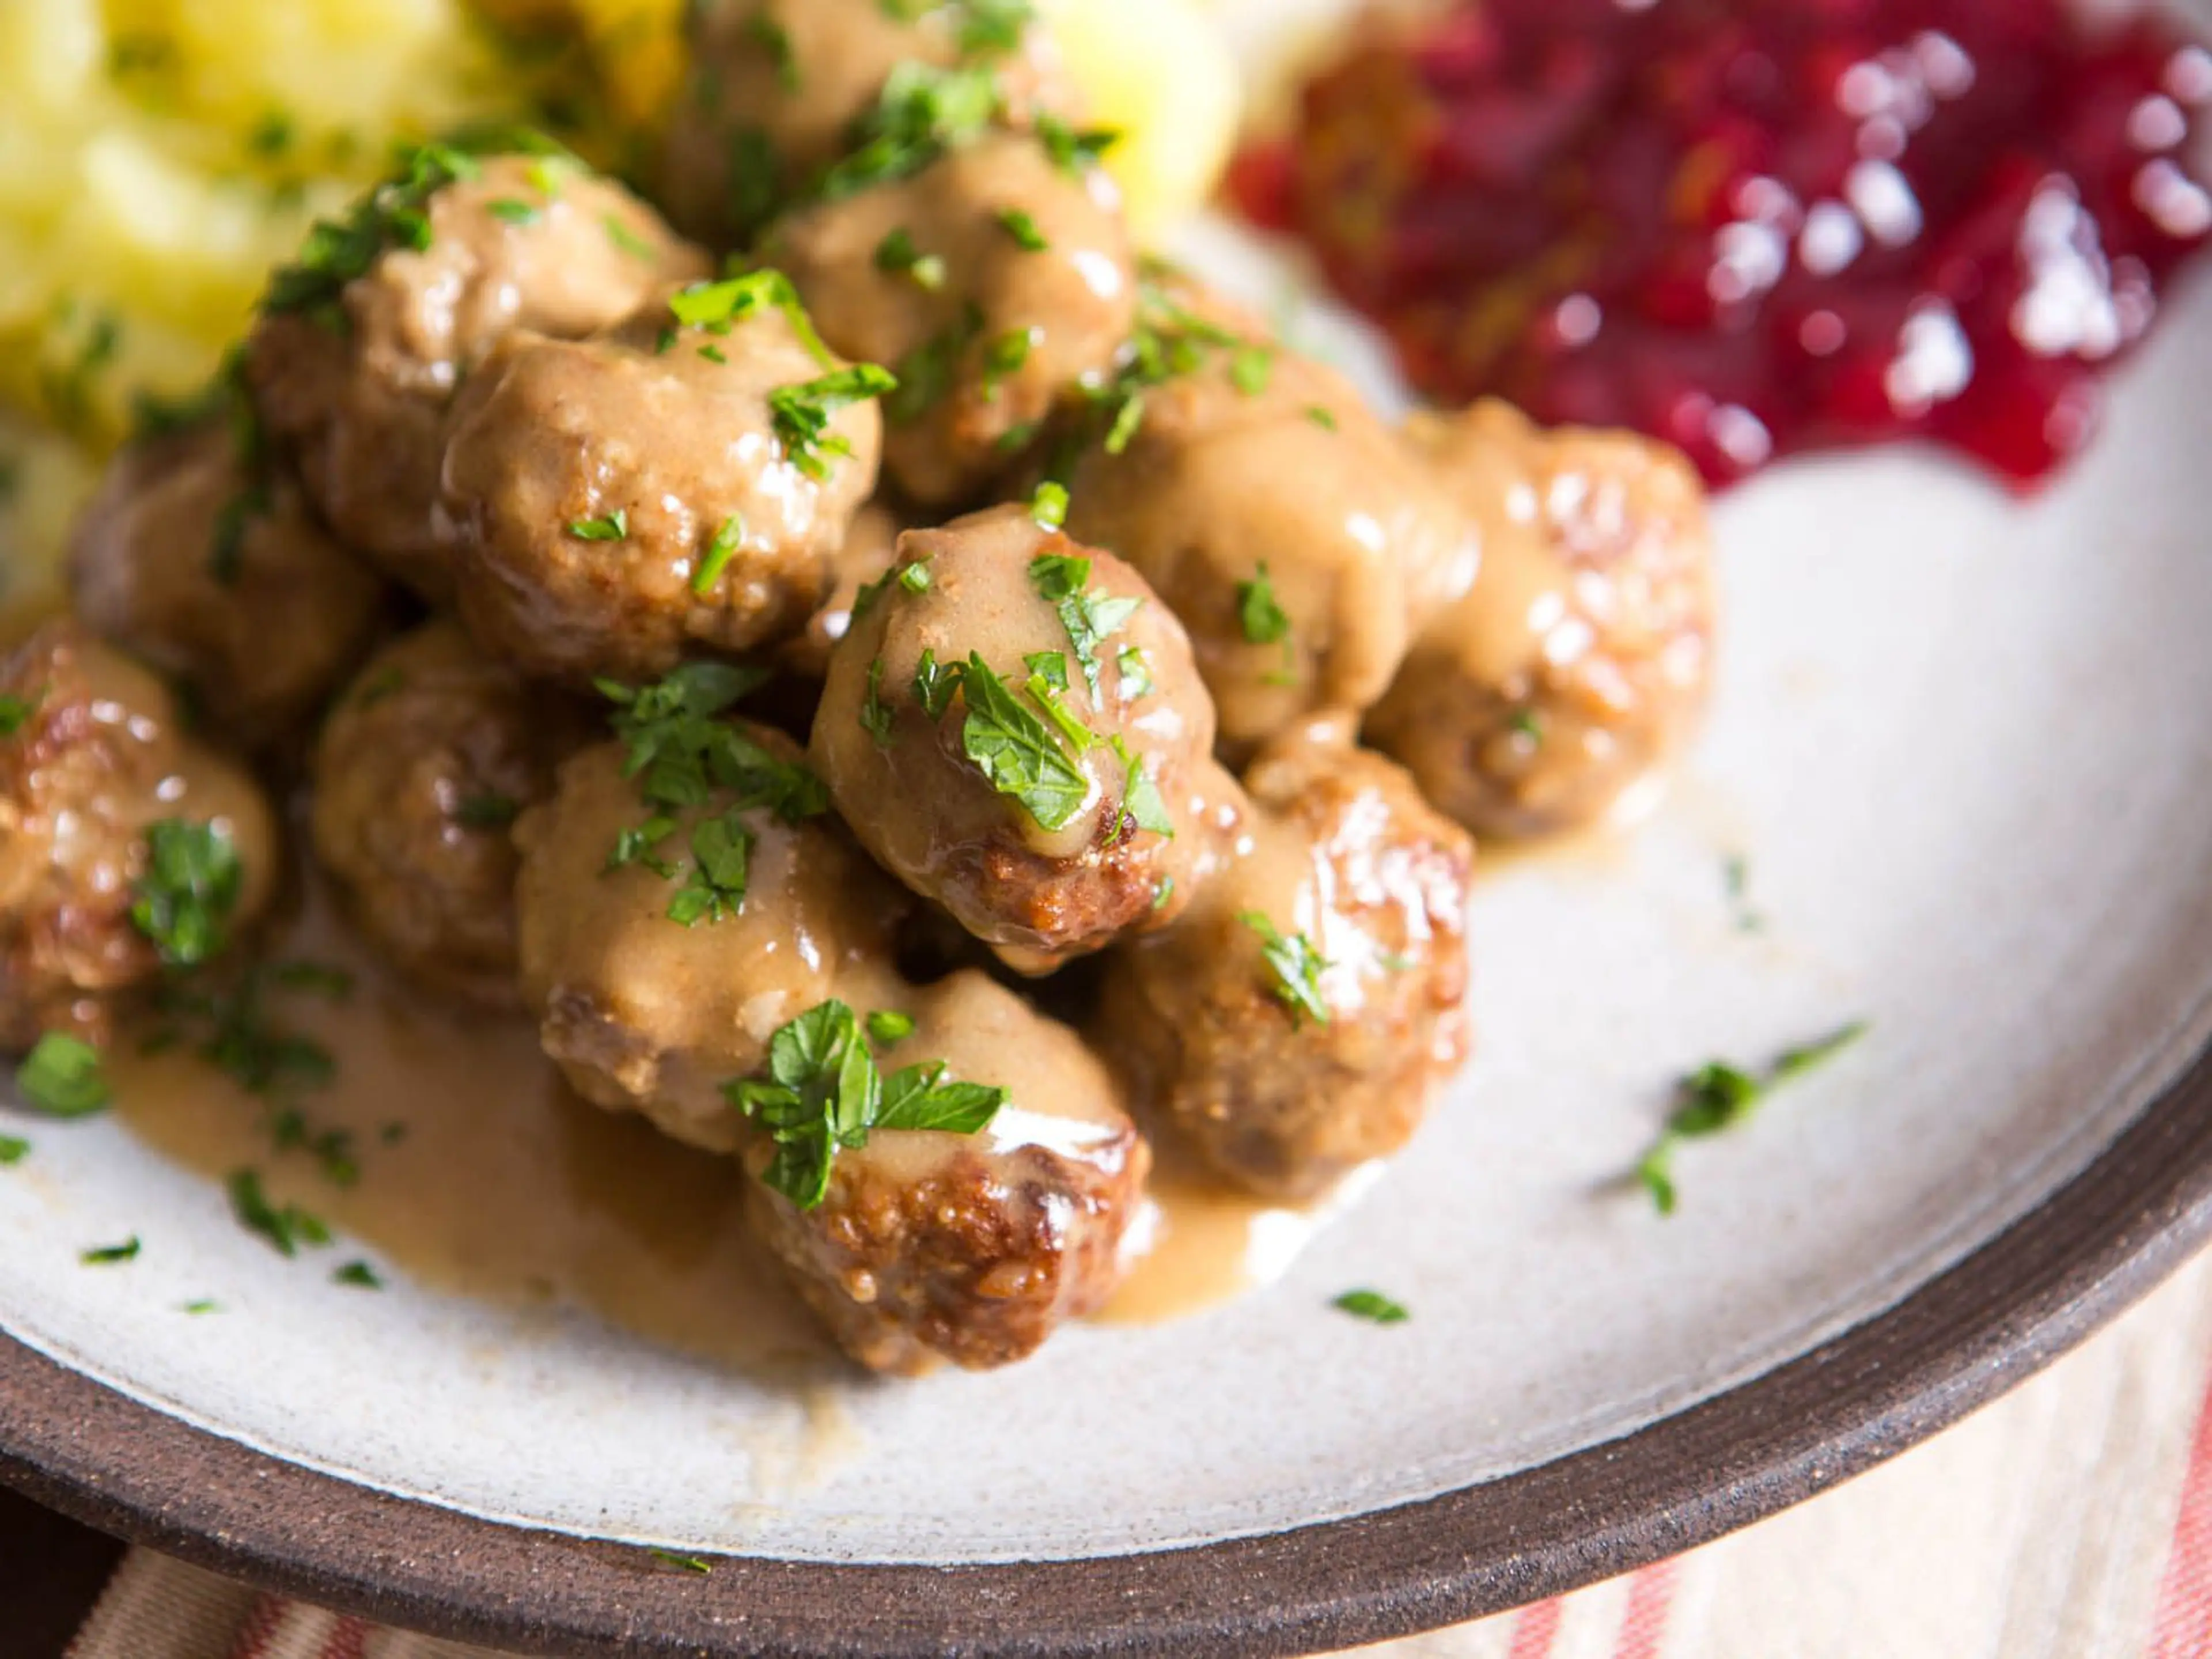 Juicy and Tender Swedish Meatballs With Rich Gravy Recipe